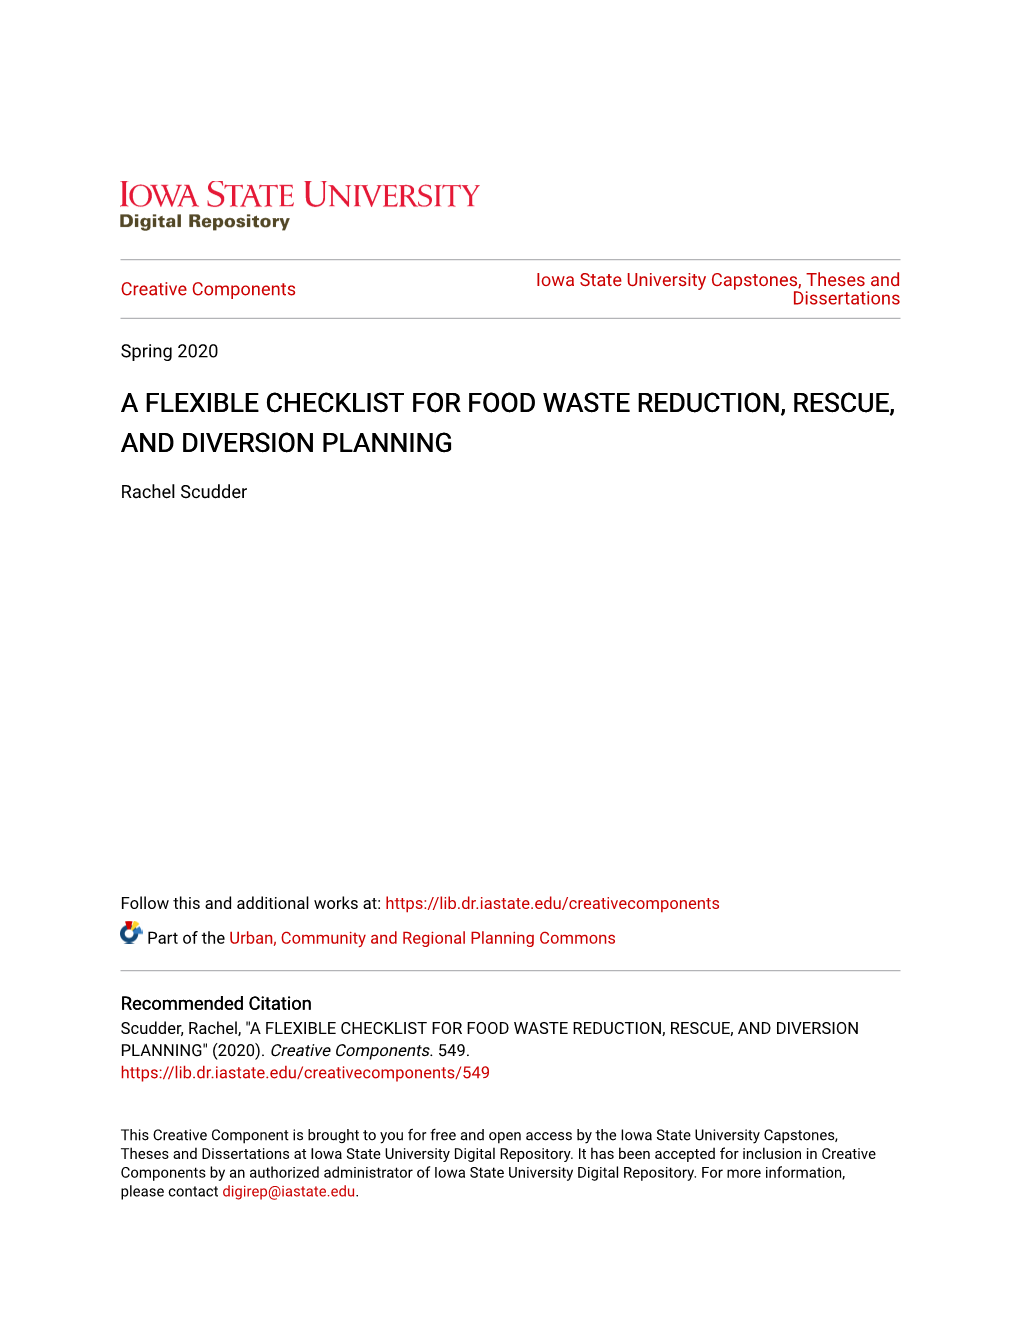 A Flexible Checklist for Food Waste Reduction, Rescue, and Diversion Planning